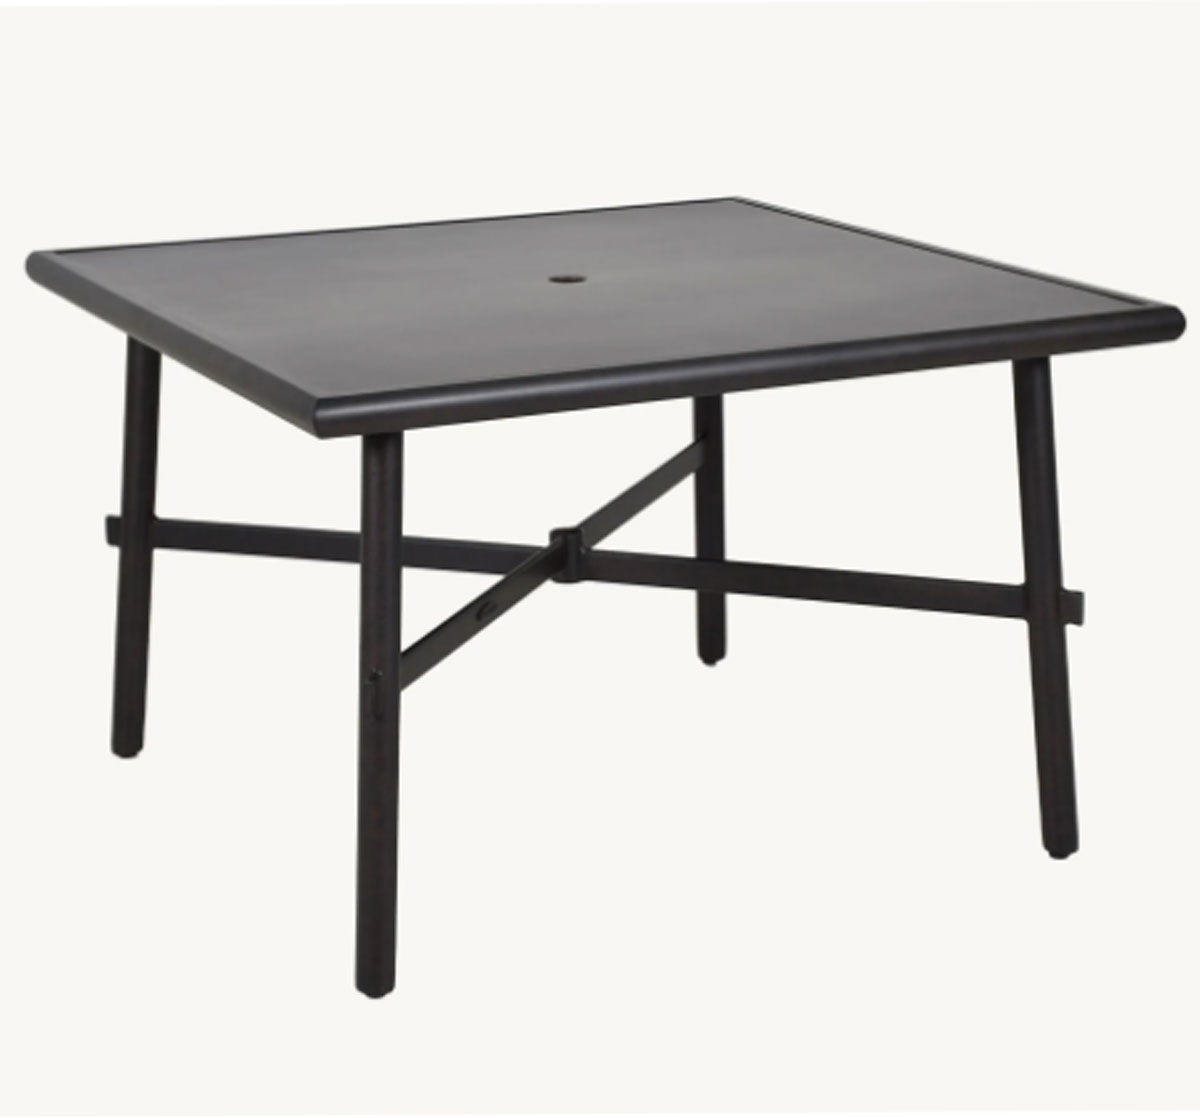 Castelle Barbados 44 inch Square Dining Table